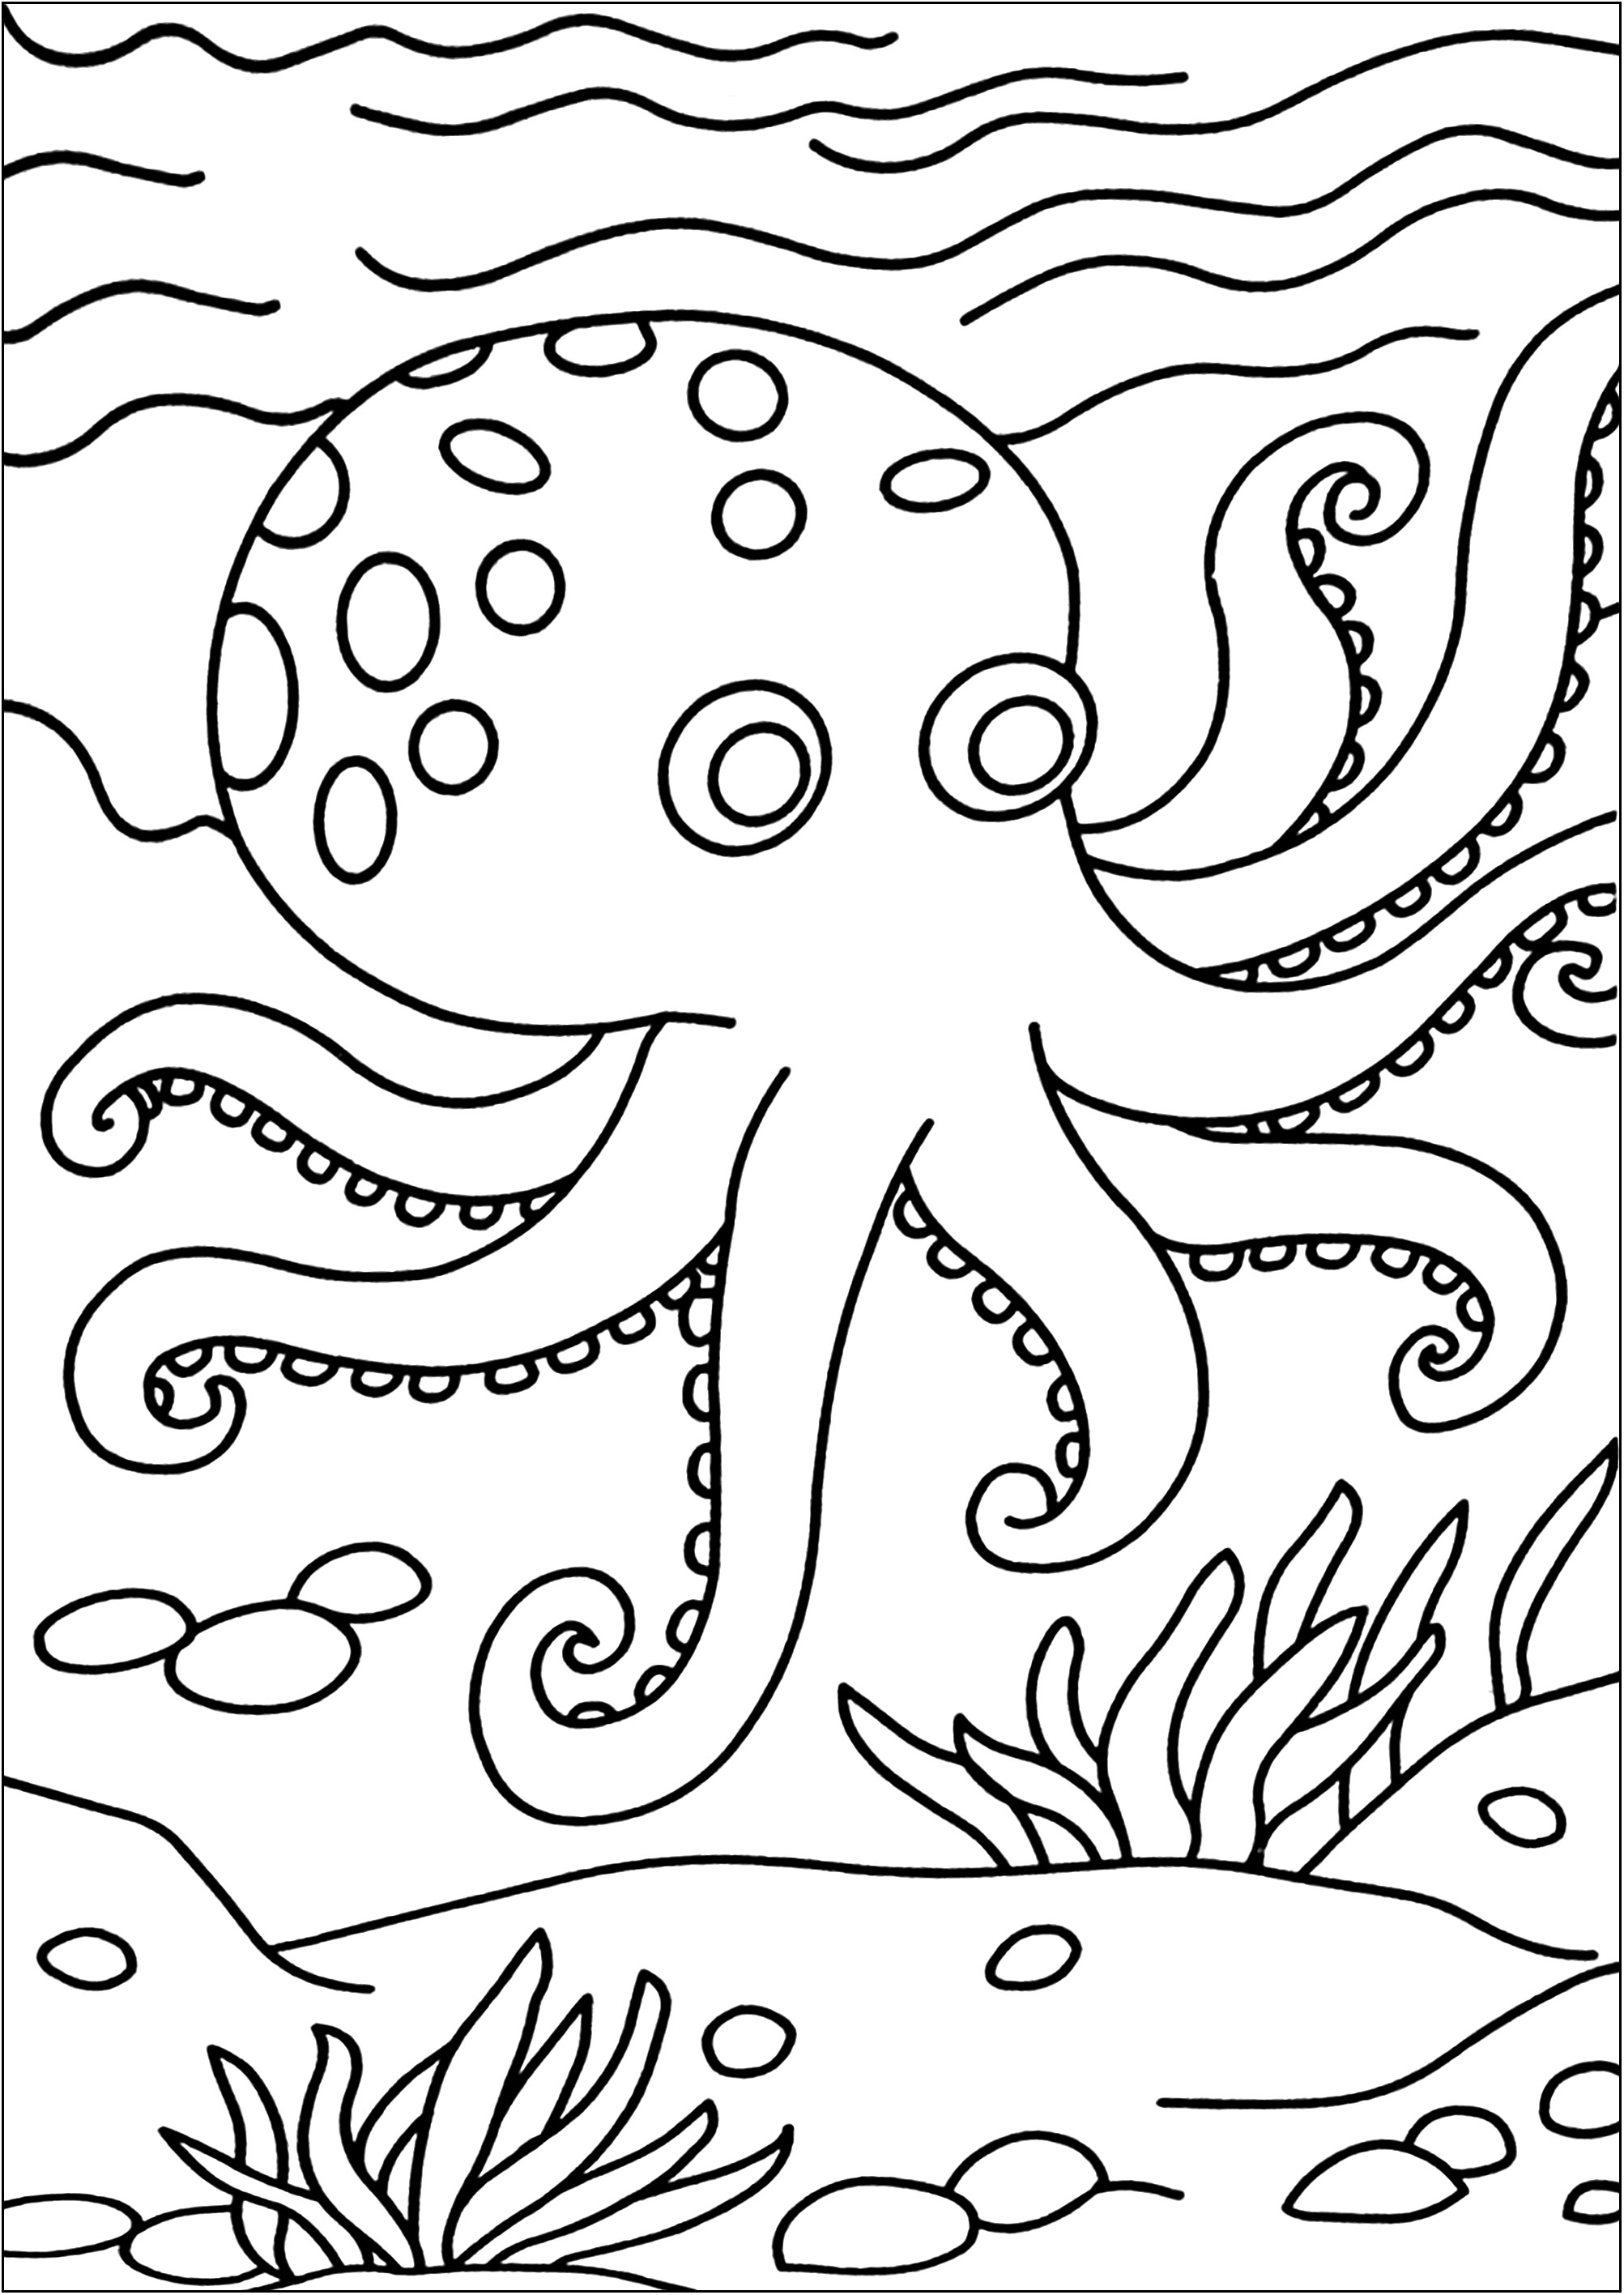 Funny free Octopuses coloring page to print and color